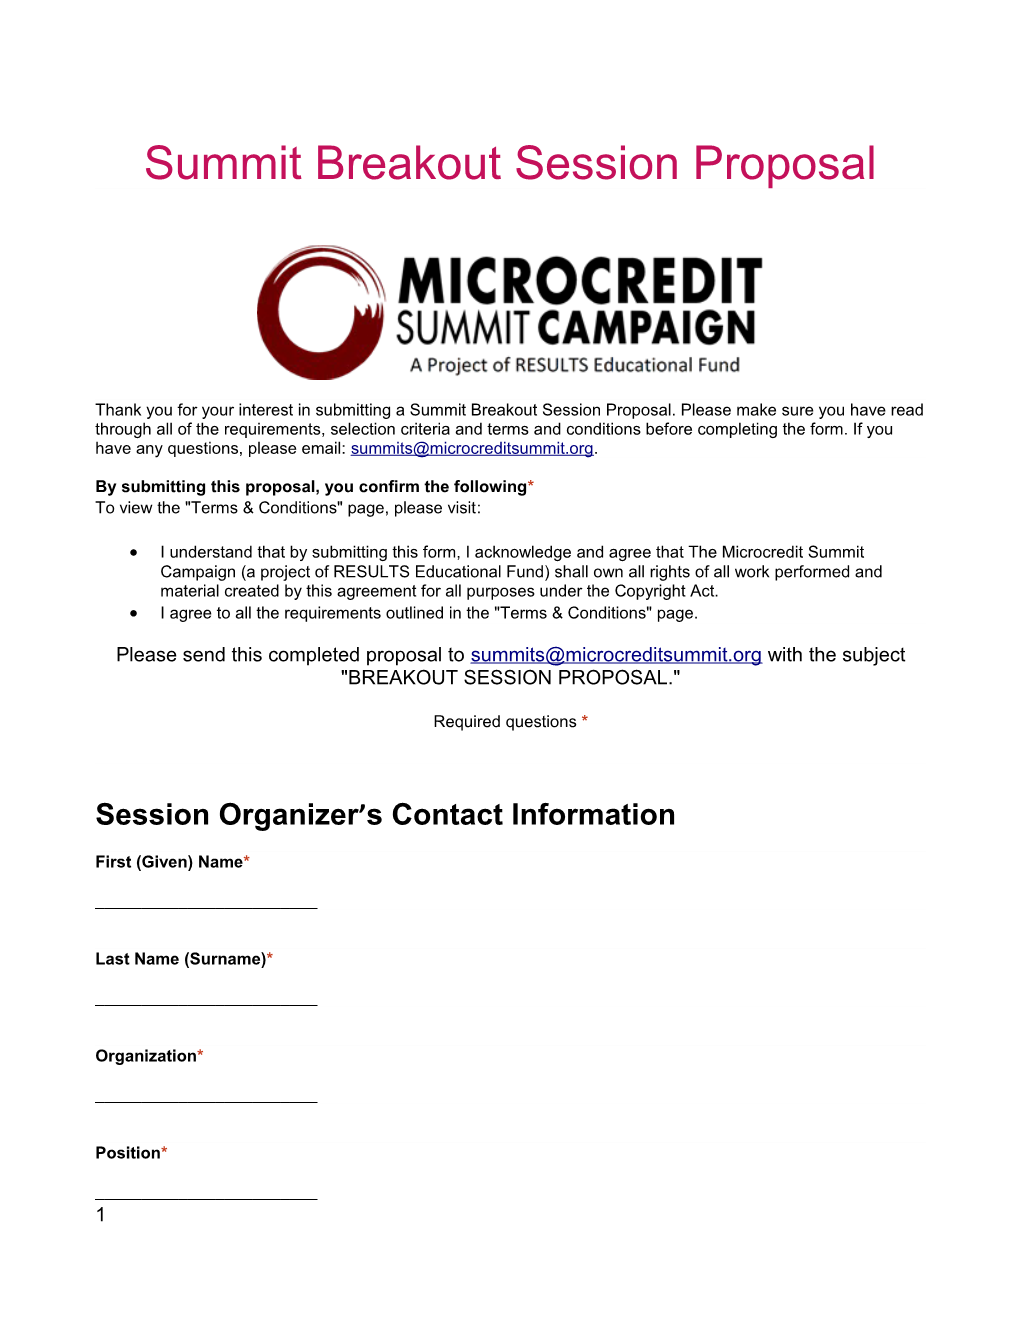 Summit Breakout Session Proposal